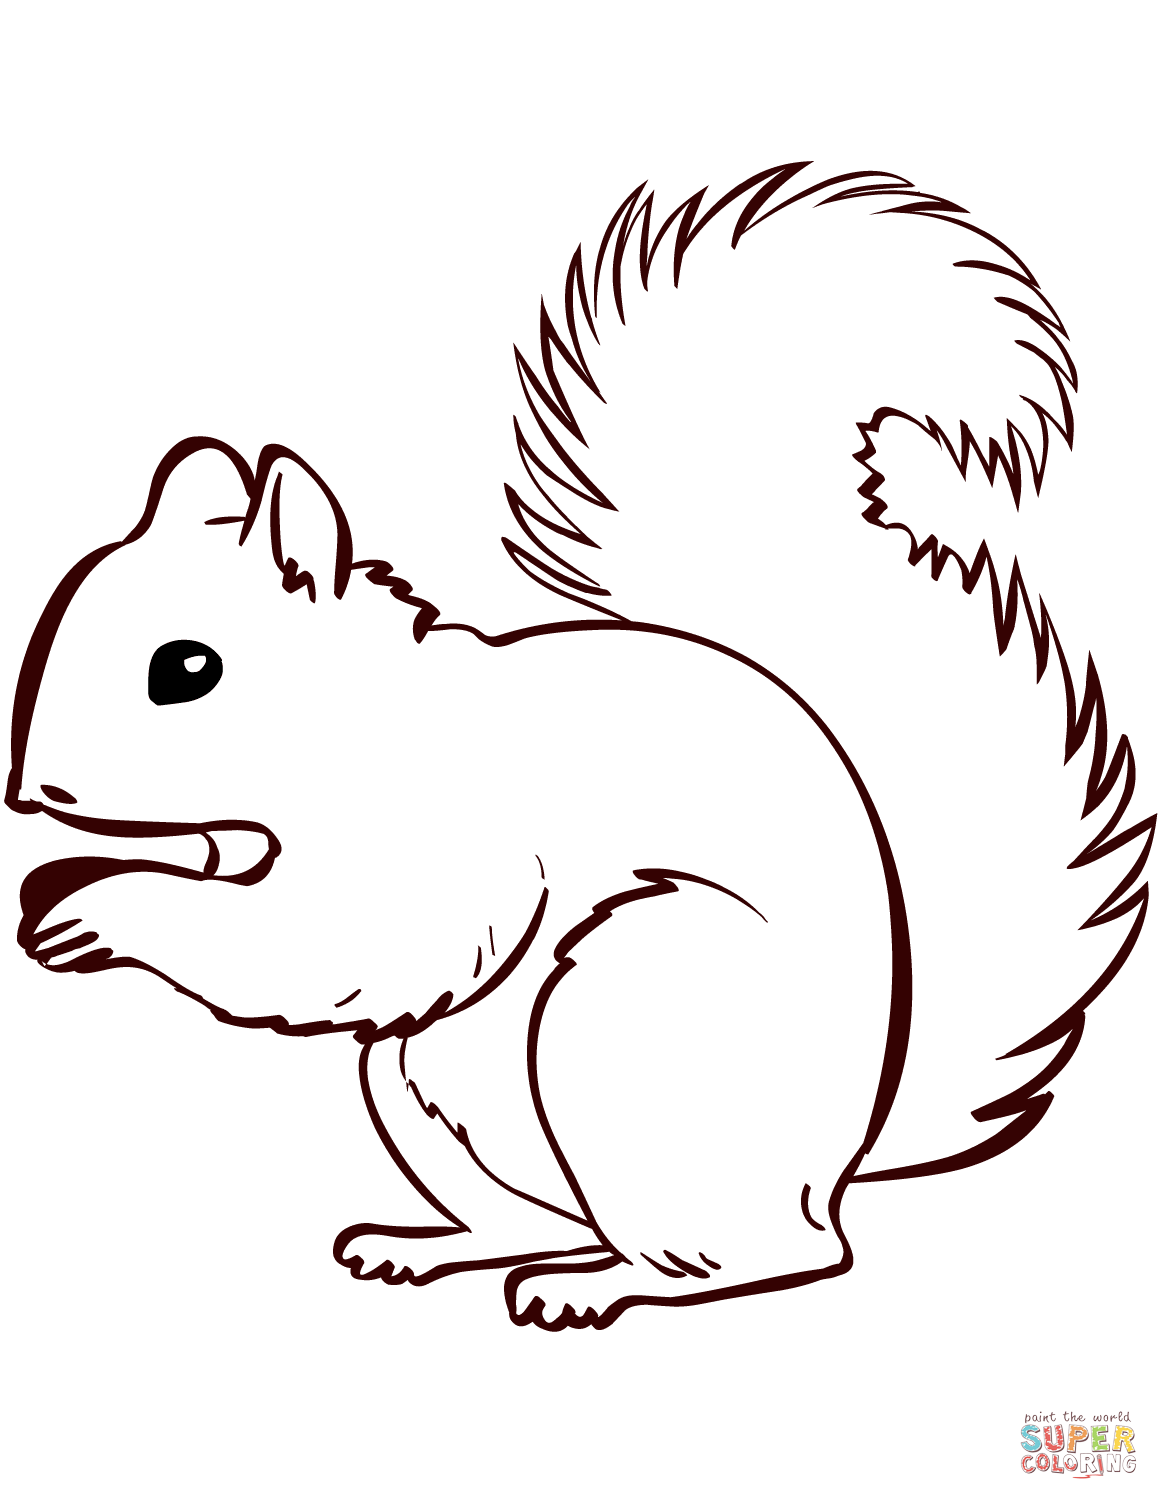 squirrel-outline-free-download-on-clipartmag